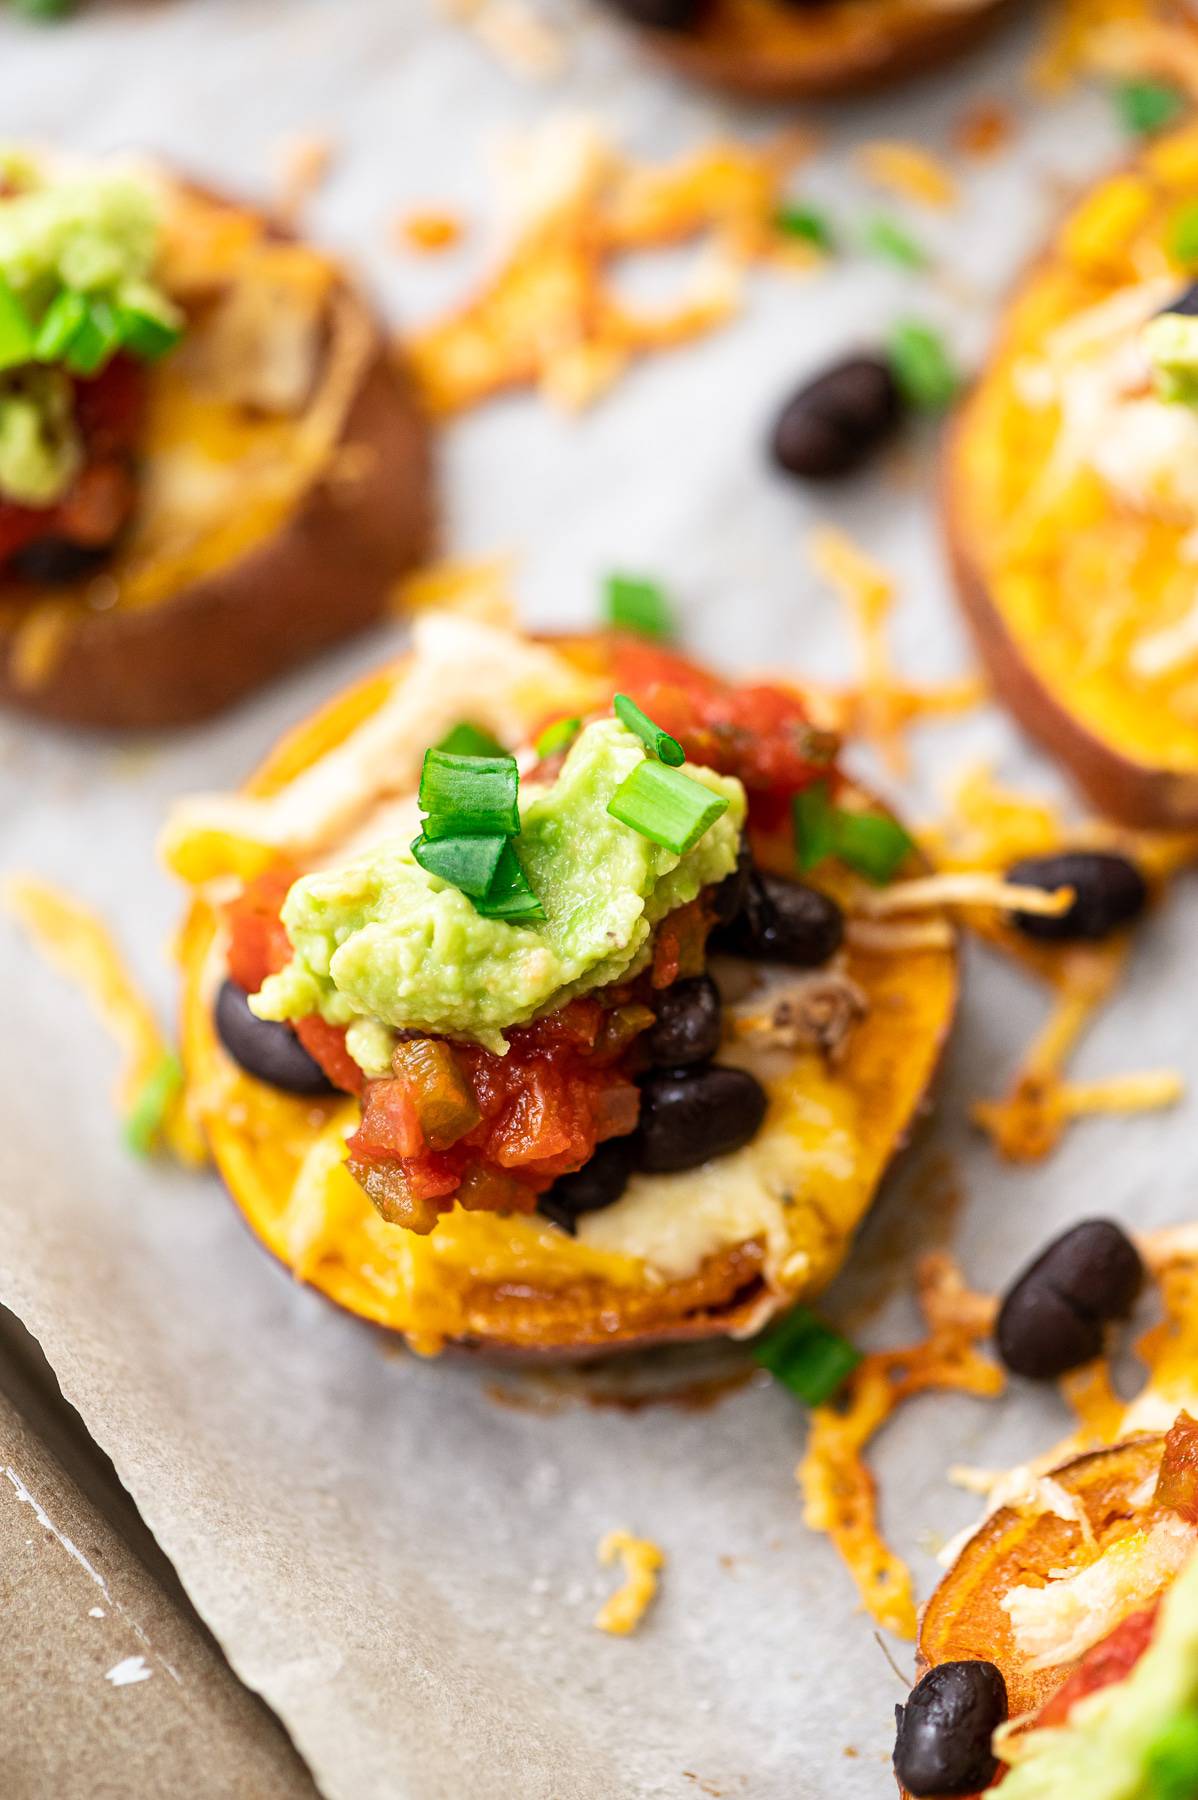 Sweet Potato sliders with nacho toppings.